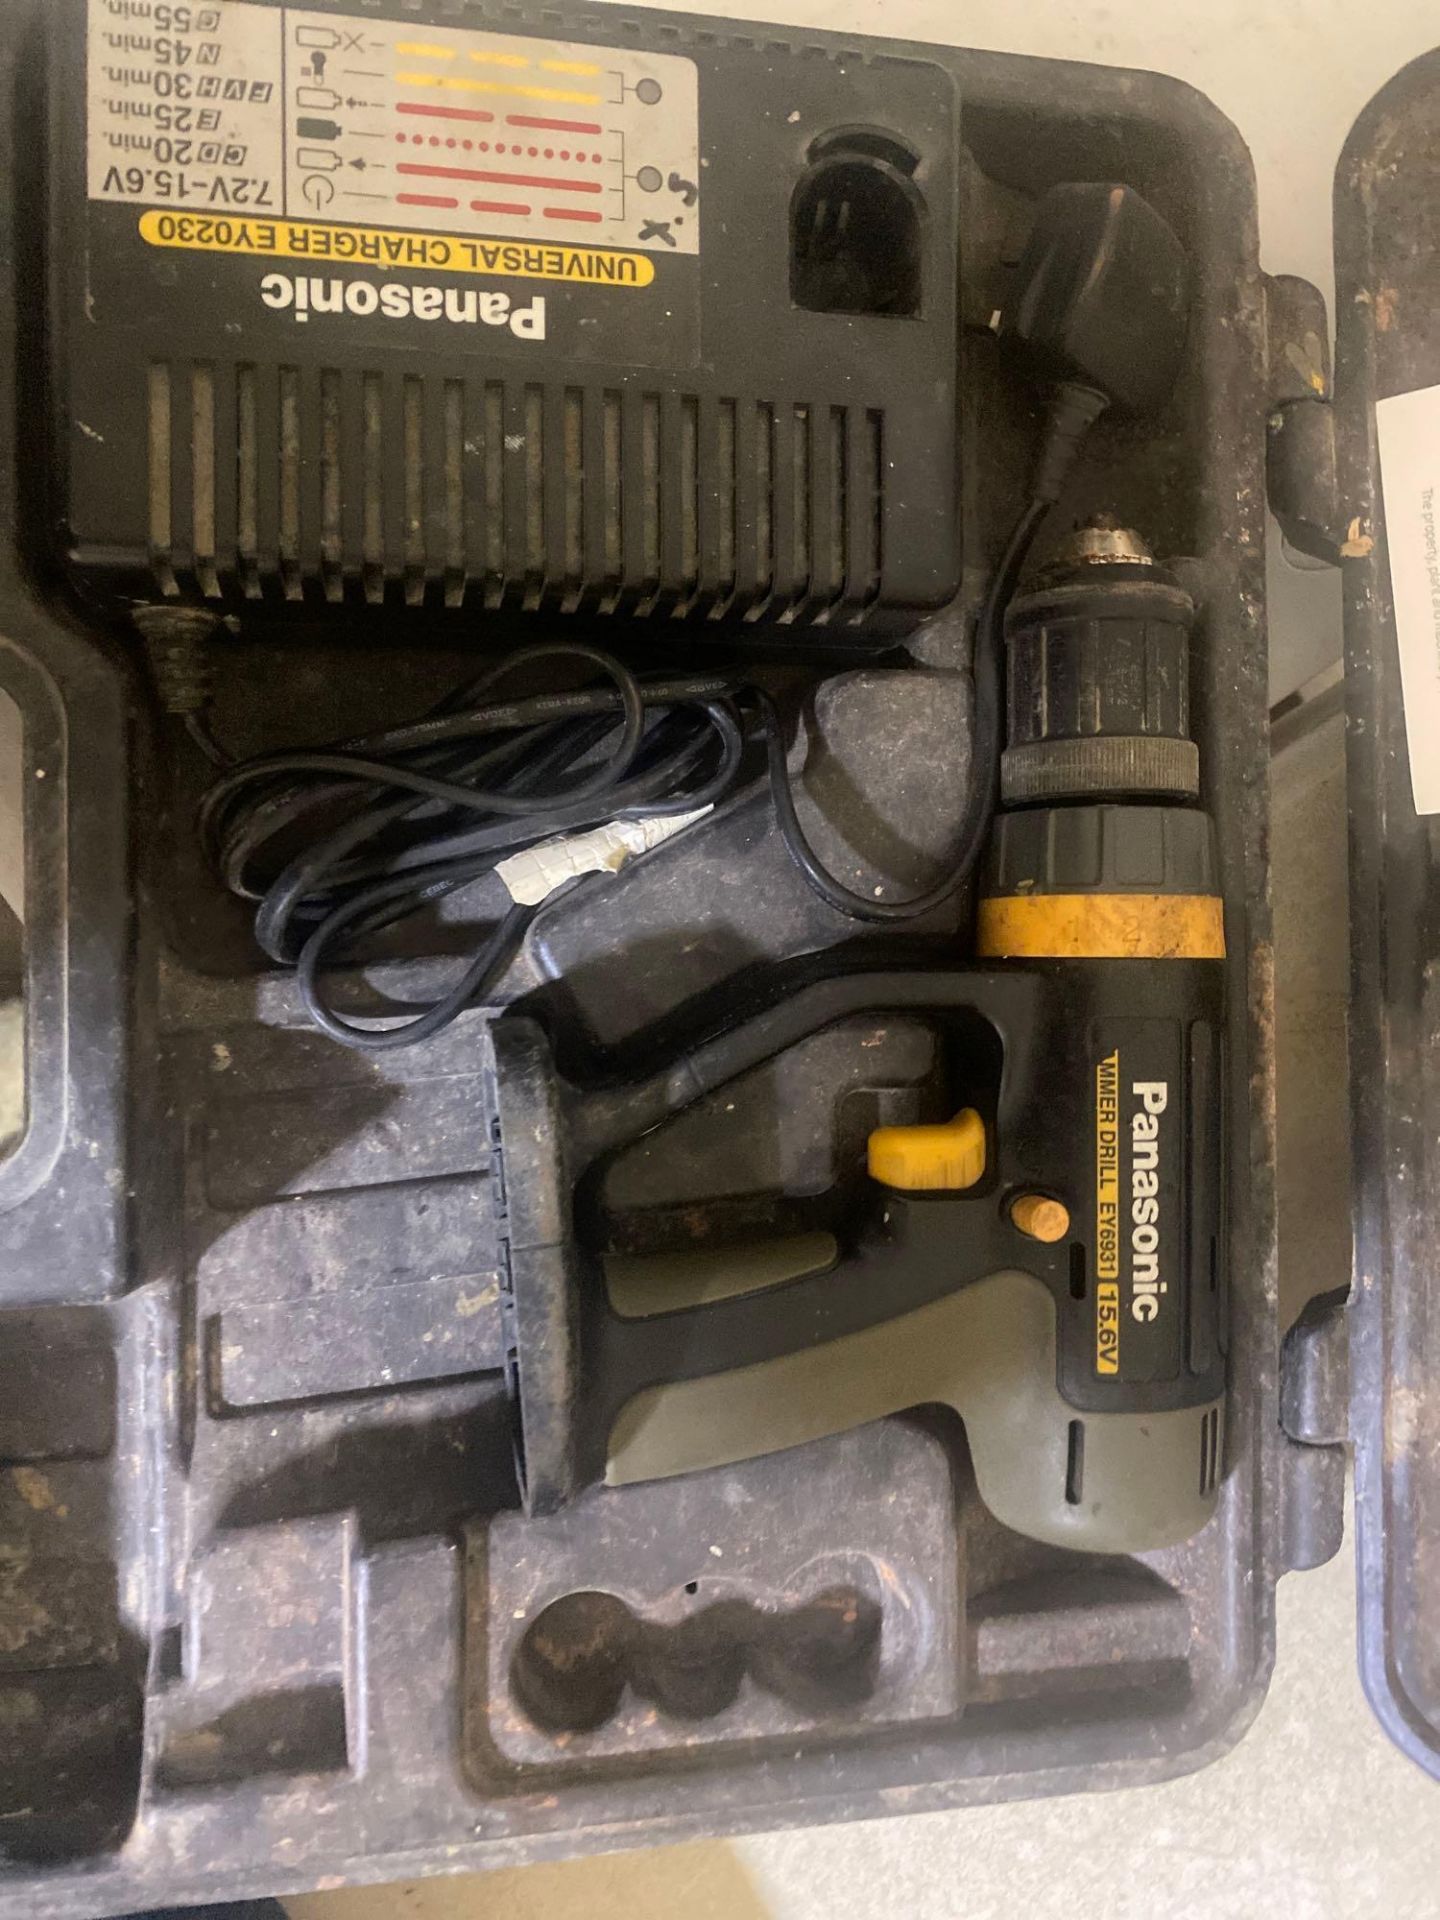 Panasonic EY6931 cordless hammer drill with charger - please note no battery - Image 2 of 2